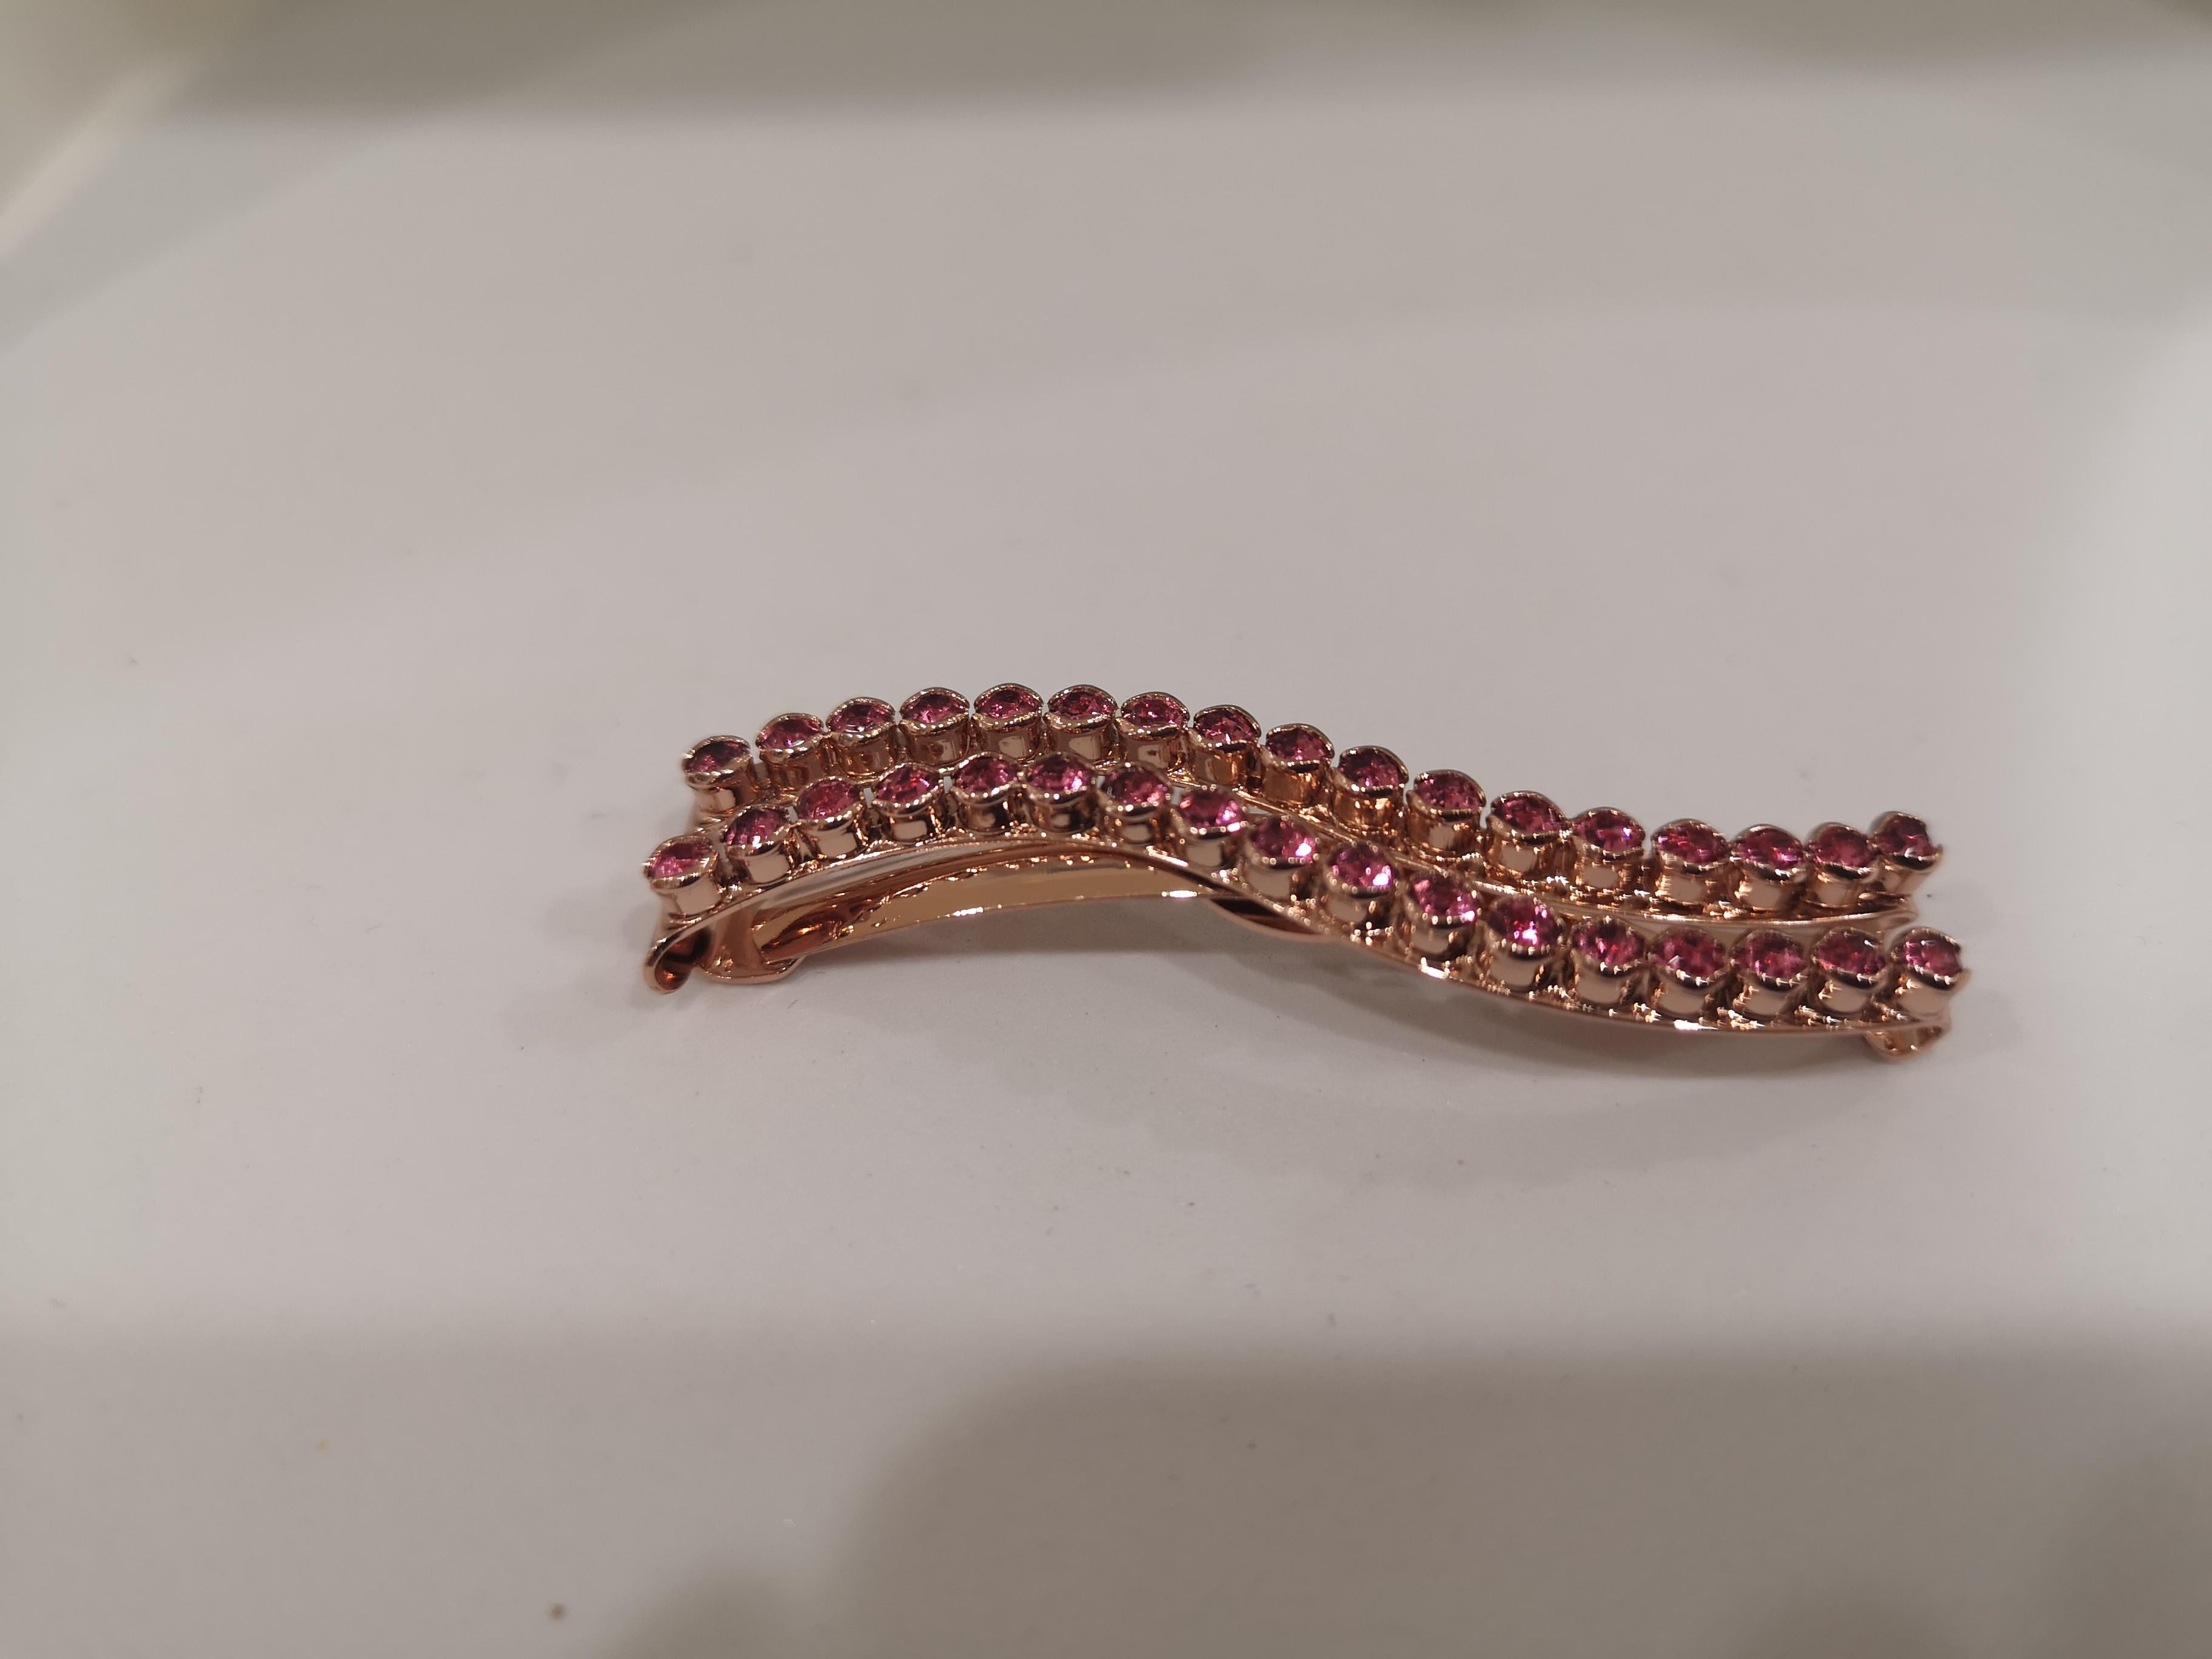 LisaC pink swarovski stones wave hair clip
totally handmade in italy with real swarovski stones
measurements: 6 cm